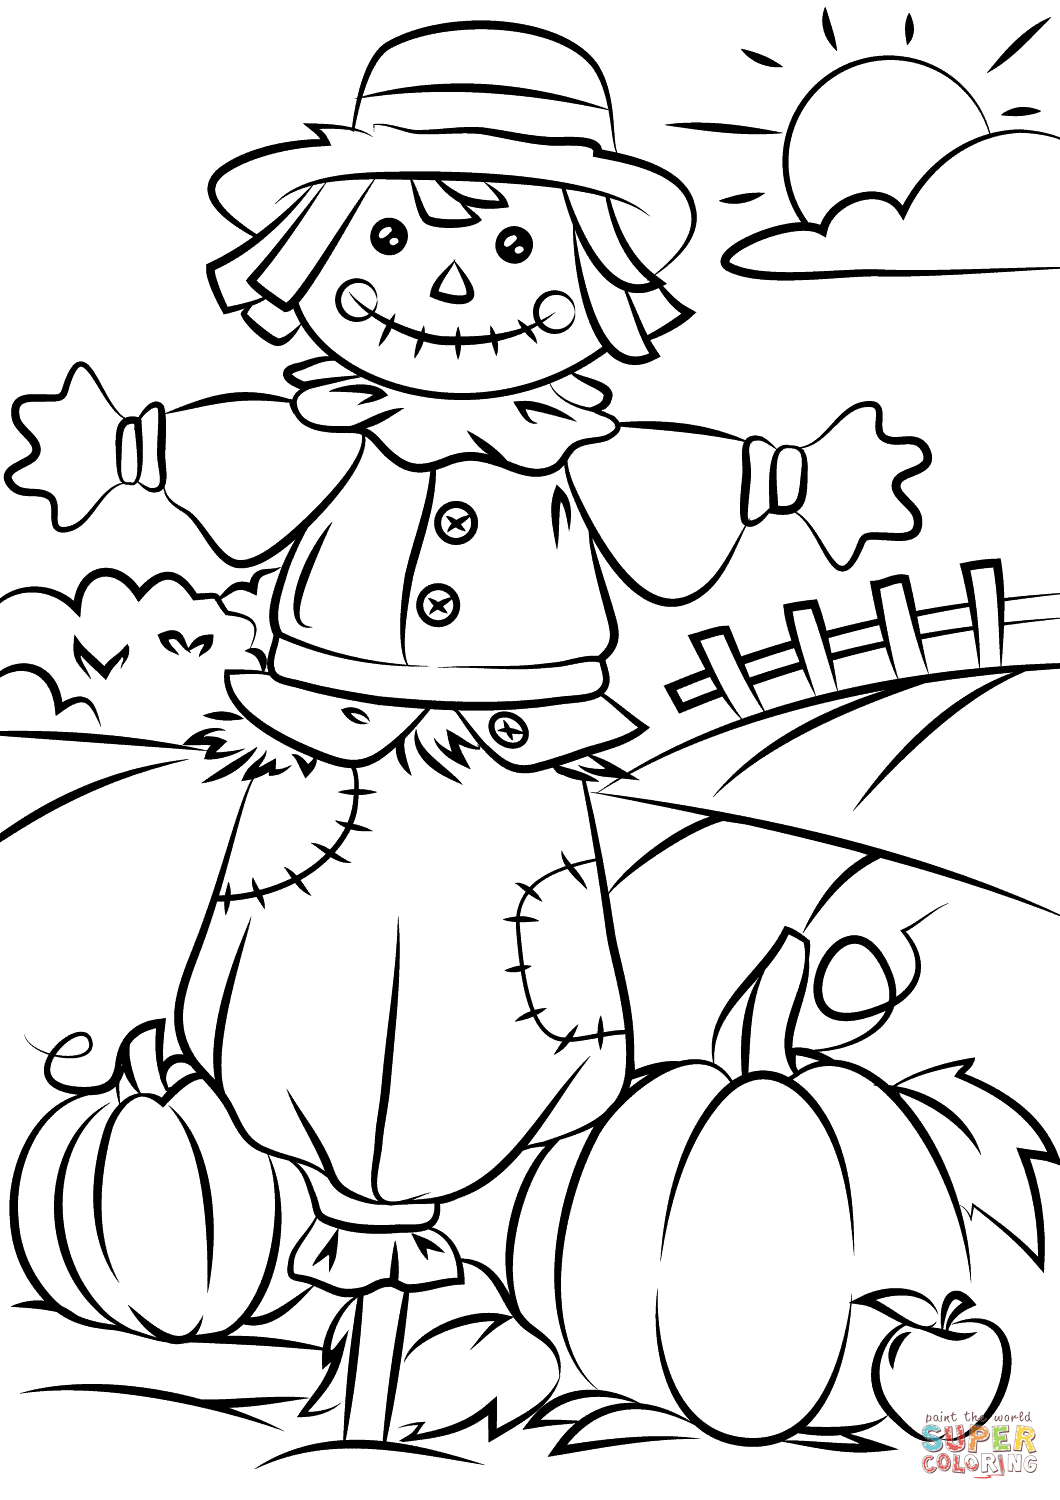 Autumn Scene With Scarecrow Coloring Page | Free Printable Coloring - Free Printable Autumn Coloring Sheets